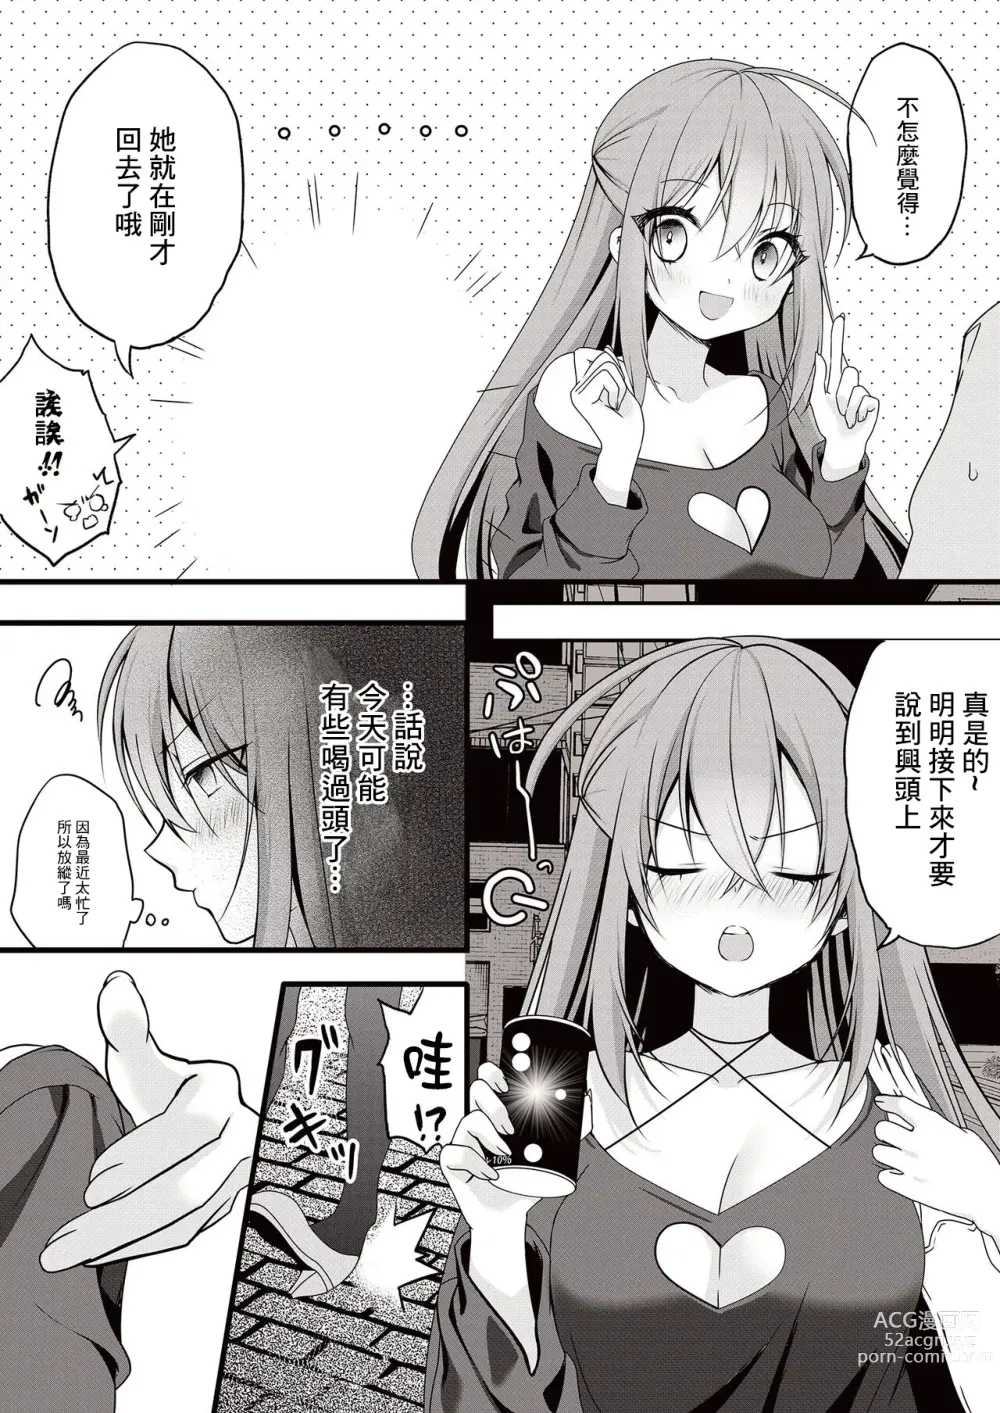 Page 4 of doujinshi Love Cherry